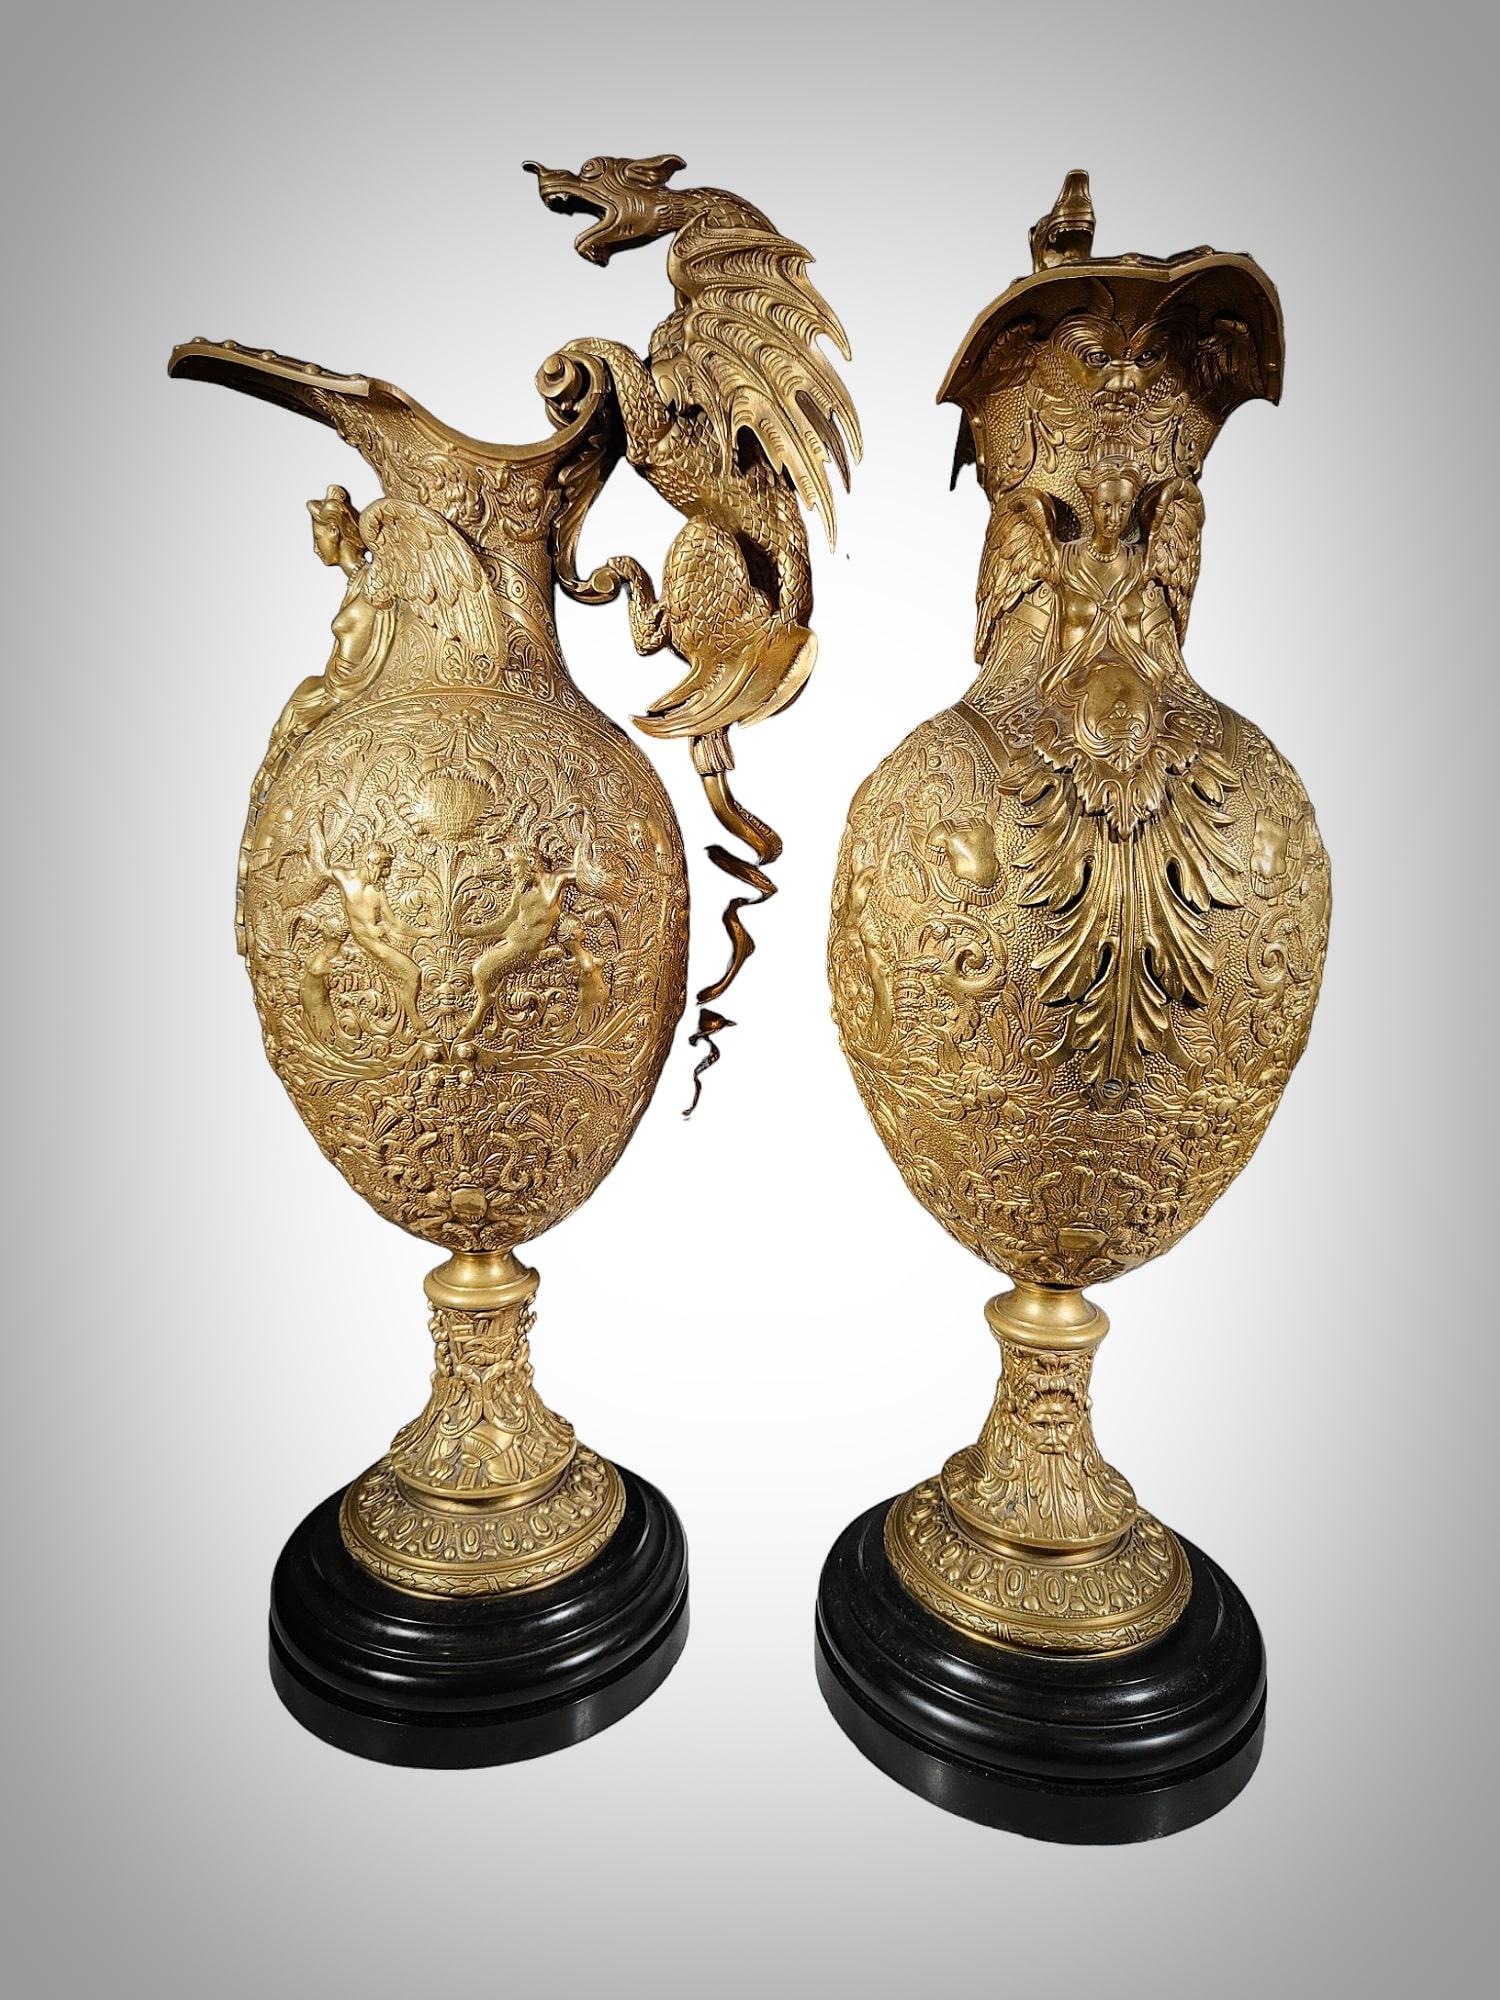 Magnificent Gilded Bronze Vases from the 19th Century For Sale 3